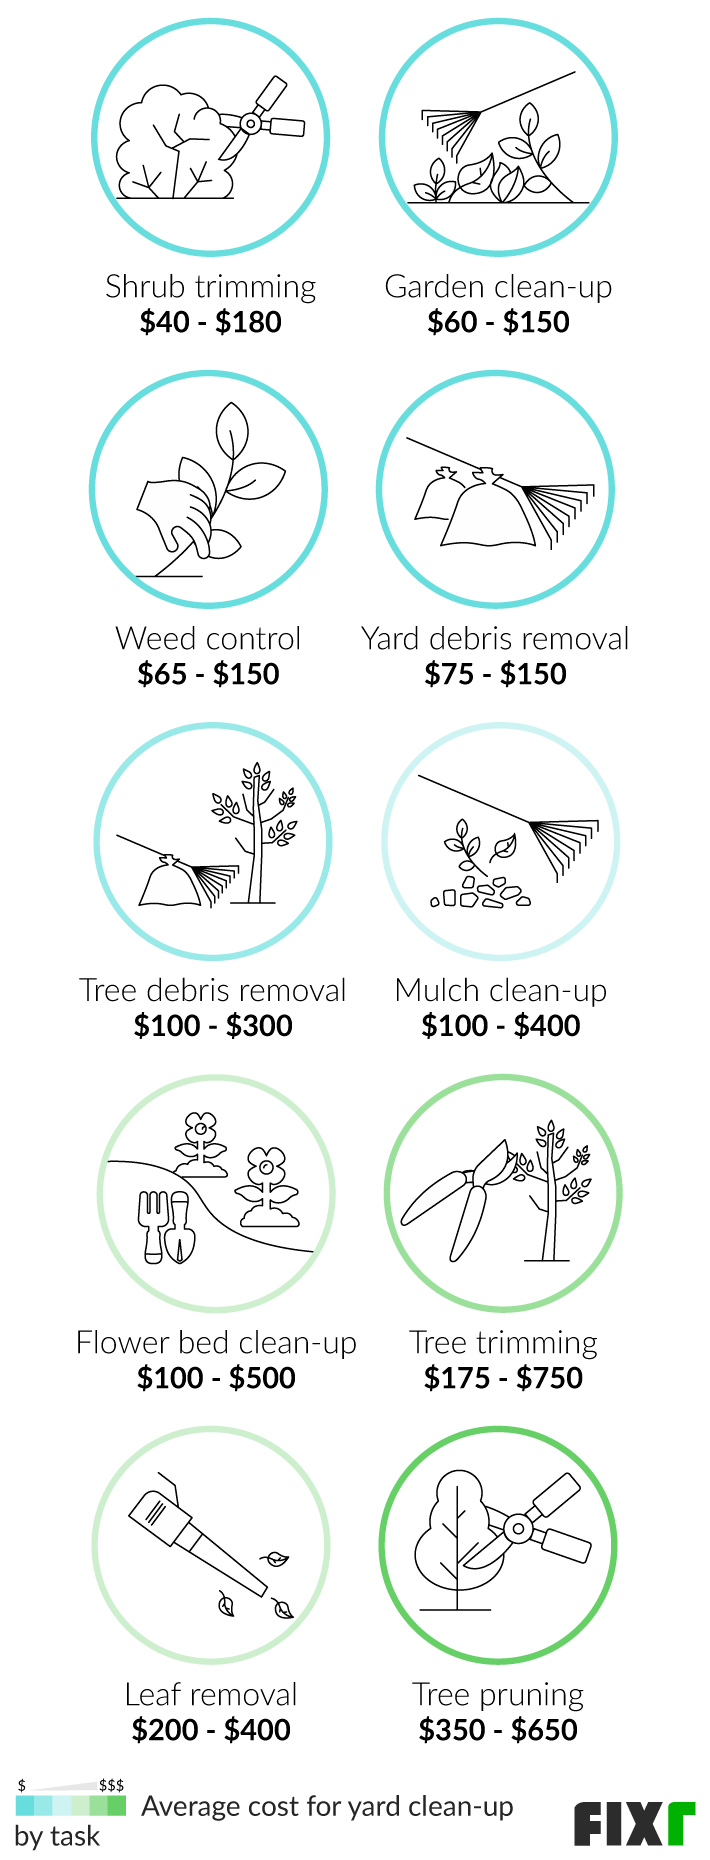 Average Cost for Yard Clean-Up by Task: Shrub Trimming, Garden Clean-Up, Weed Control, Yard Debris Removal, Tree Debris Removal, Leaf Clean-Up, Tree Trimming and Pruning...